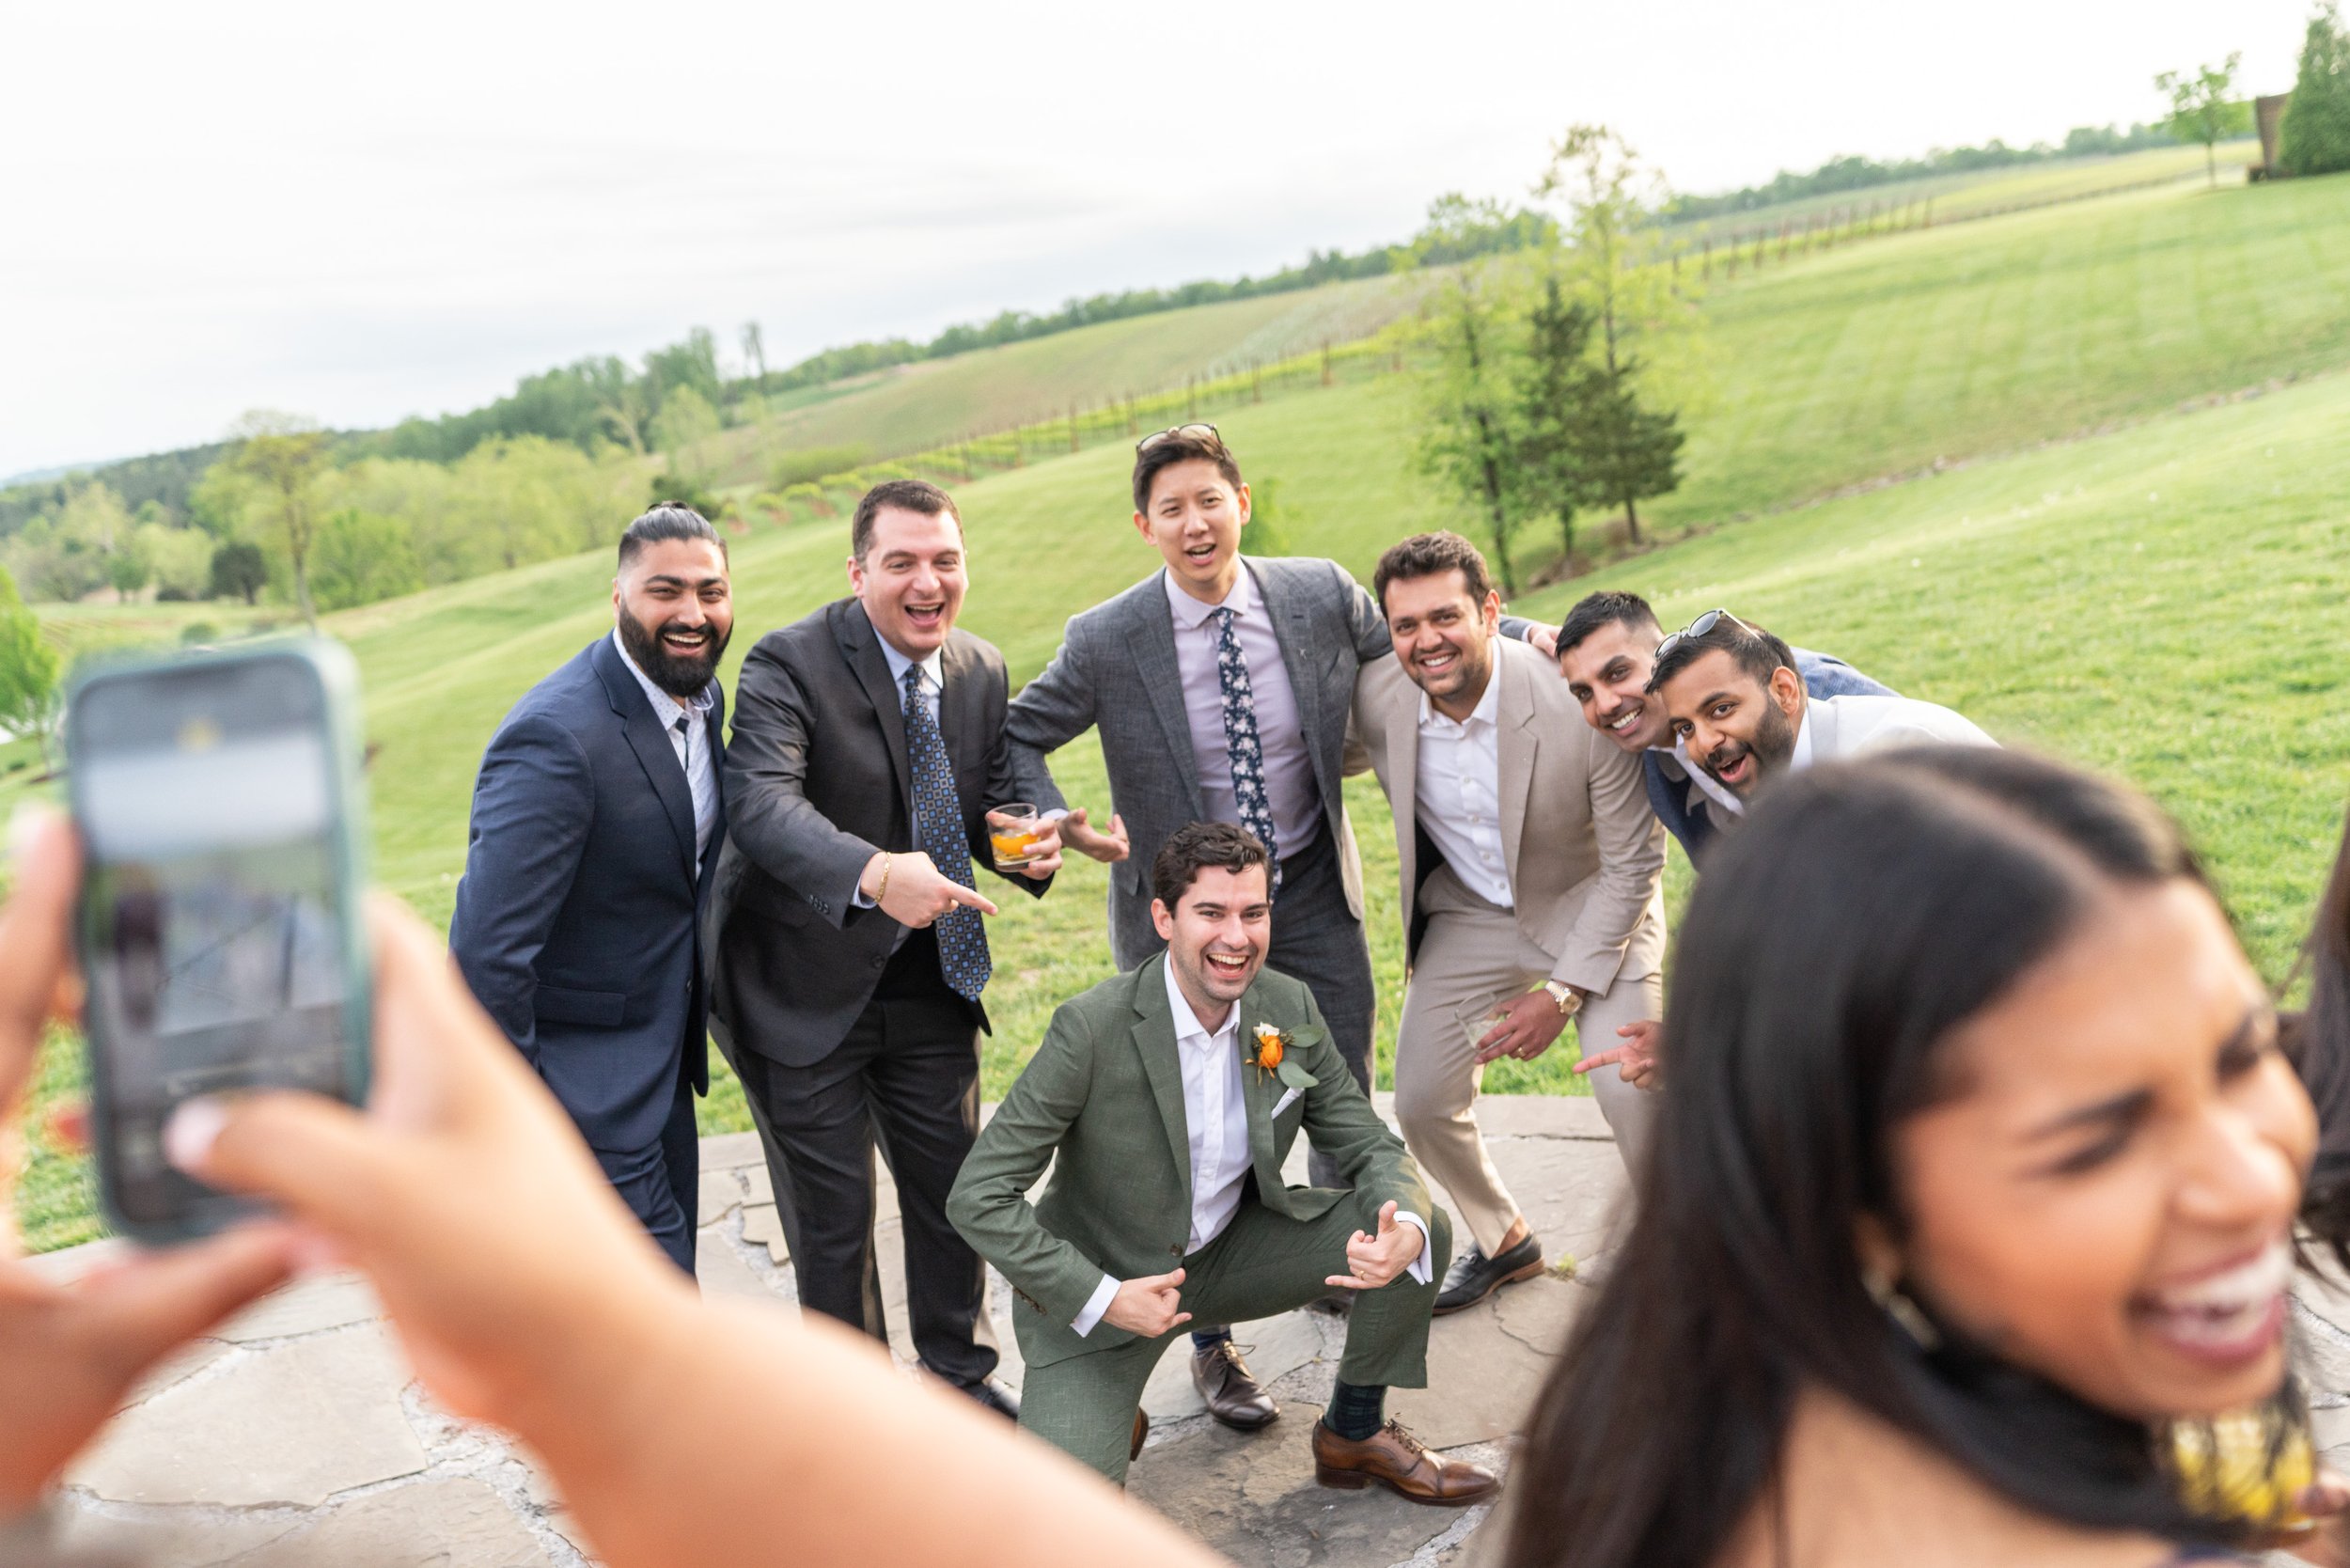 Groom poses with his friends for a photo during cocktail hour